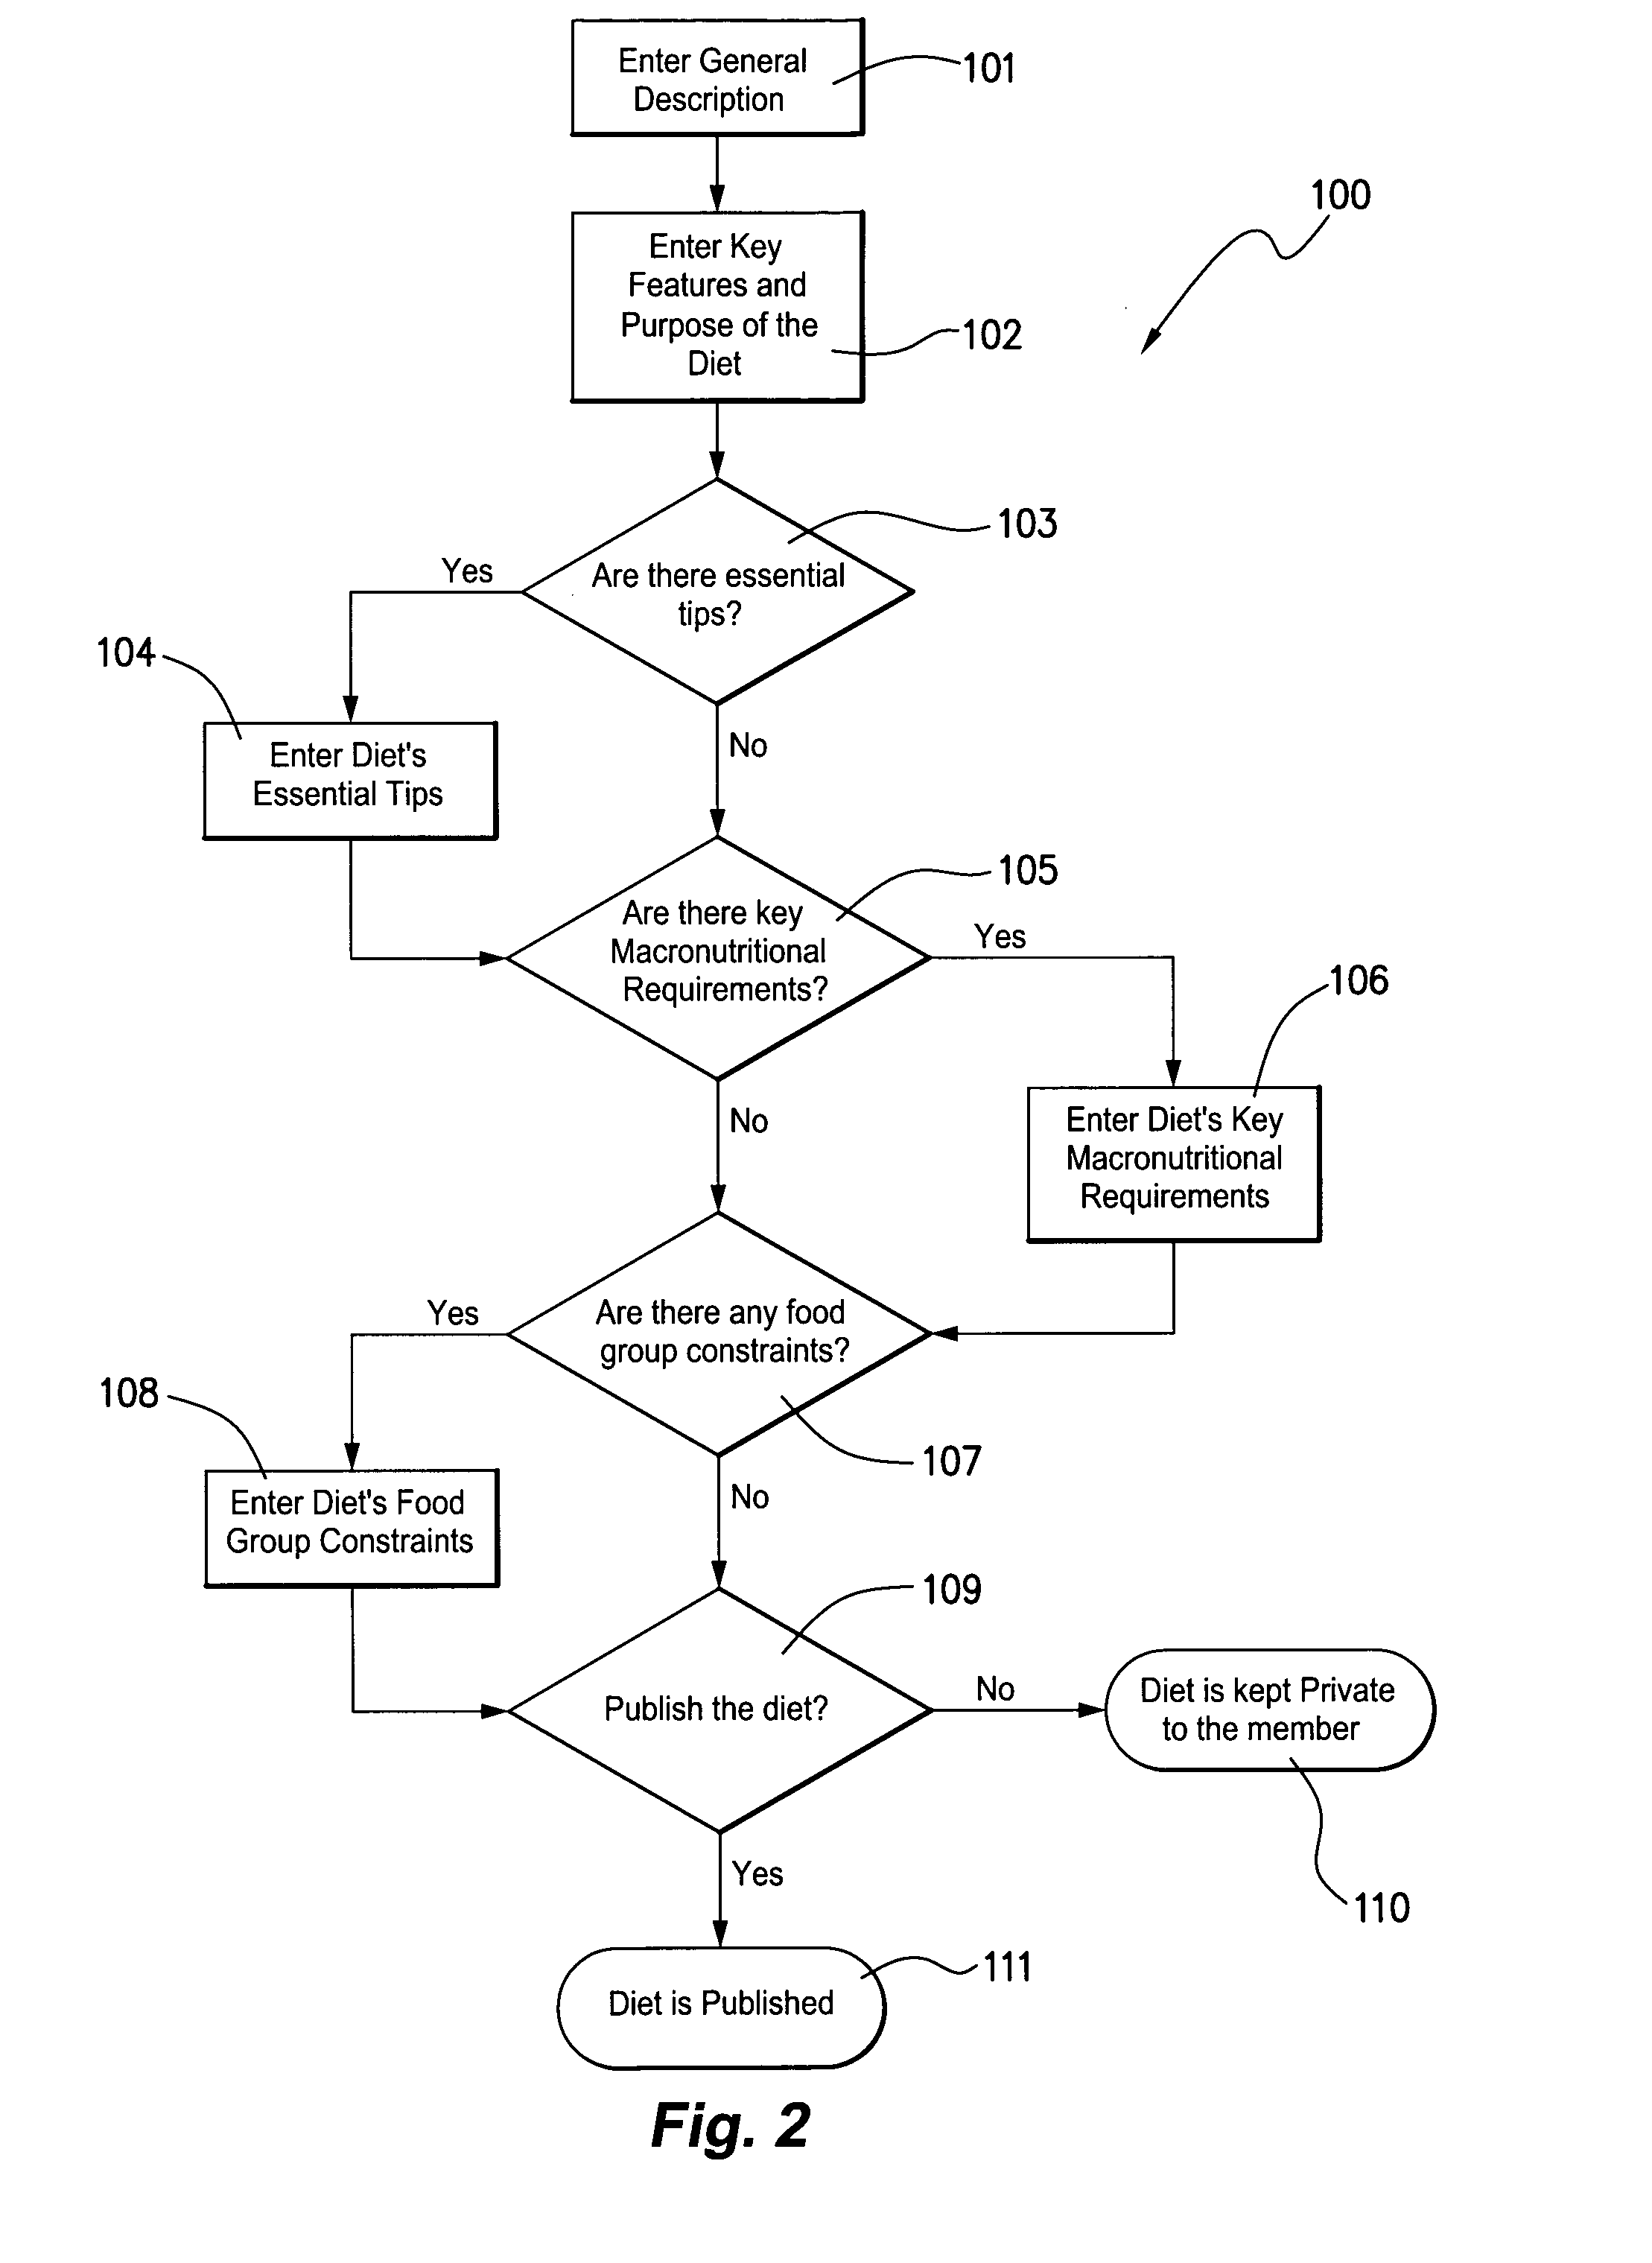 System and/or Method for Sharing and Evaluating Dietary Information